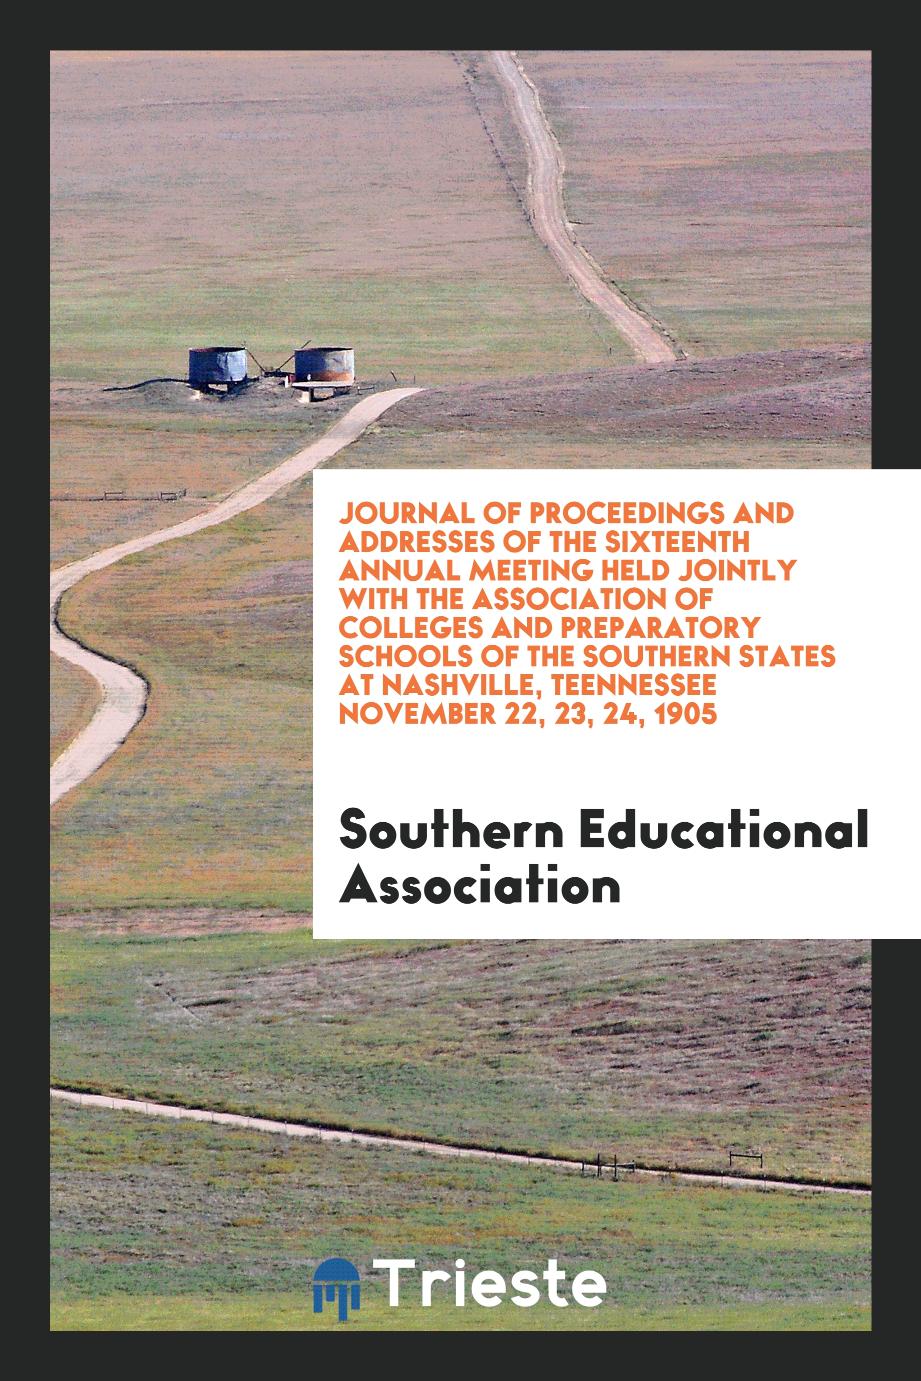 Journal of Proceedings and Addresses of the Sixteenth Annual Meeting Held Jointly with the Association of Colleges and Preparatory Schools of the Southern States at Nashville, Teennessee November 22, 23, 24, 1905